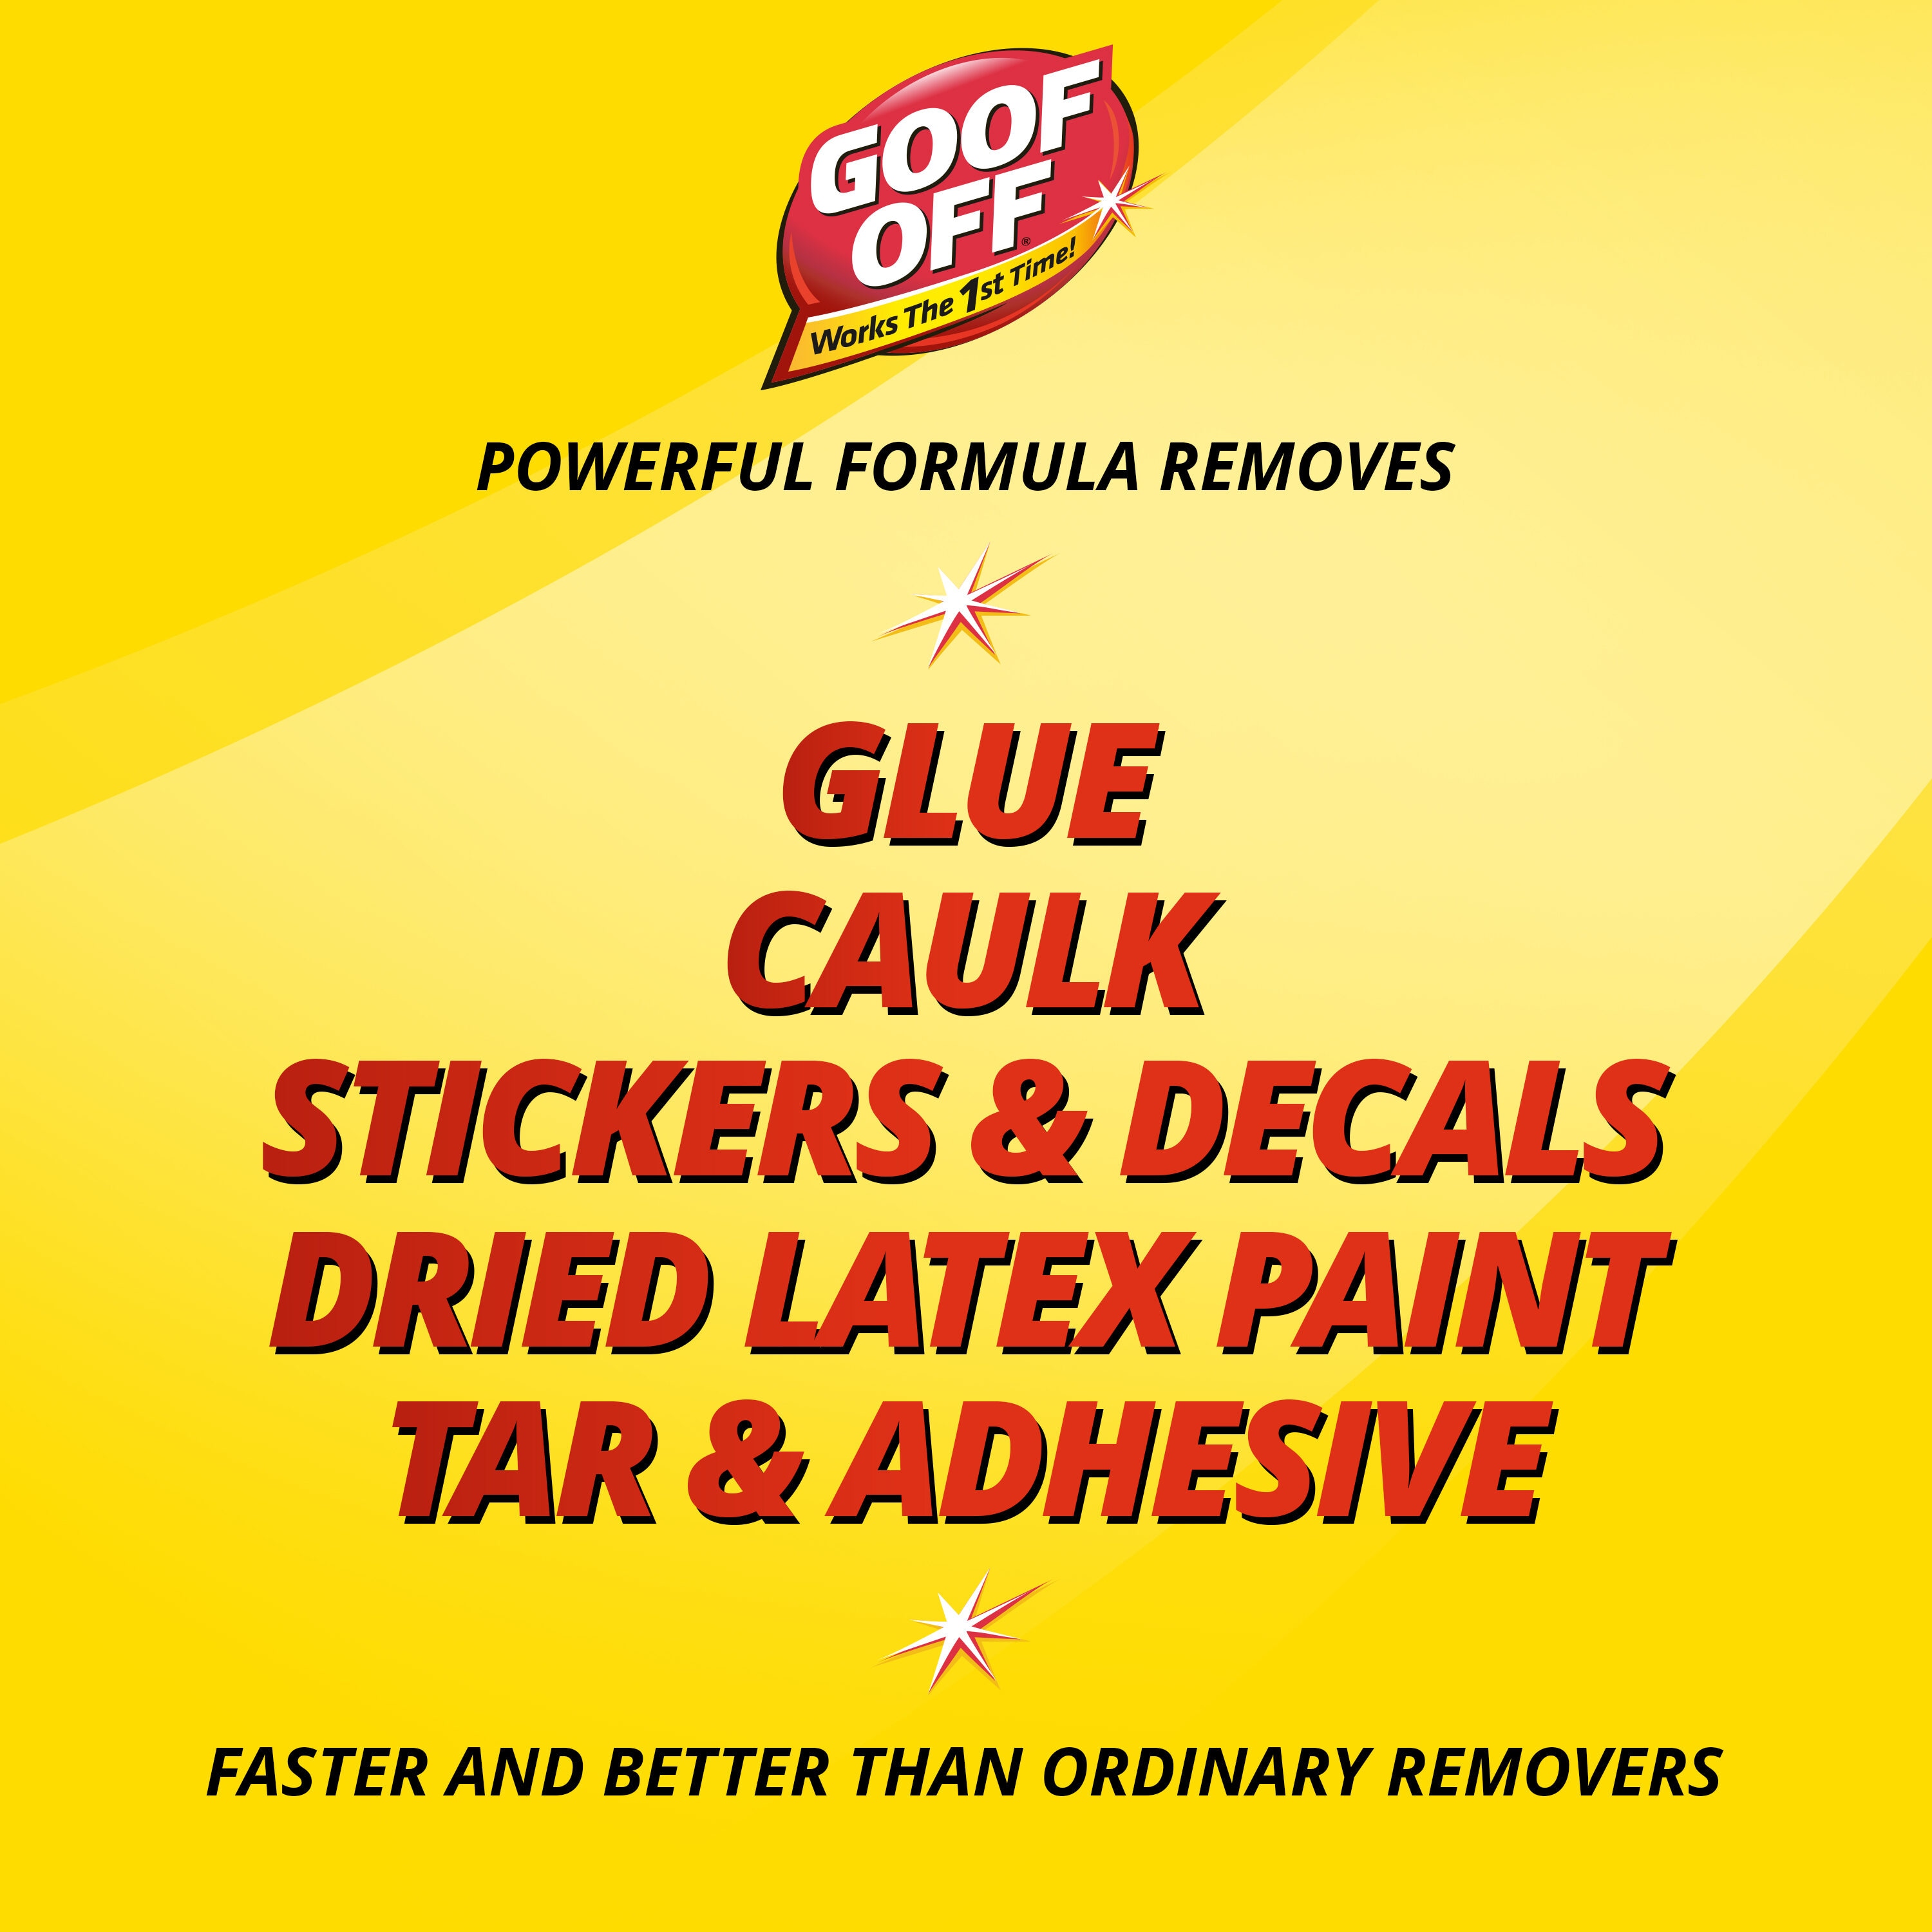 Goof Off Fast-Acting Liquid Adhesive Remover - Removes Dried Latex Paint &  Tough Adhesives - Pour Bottle - Ideal for Baseboards, Wood, Metal, Glass 